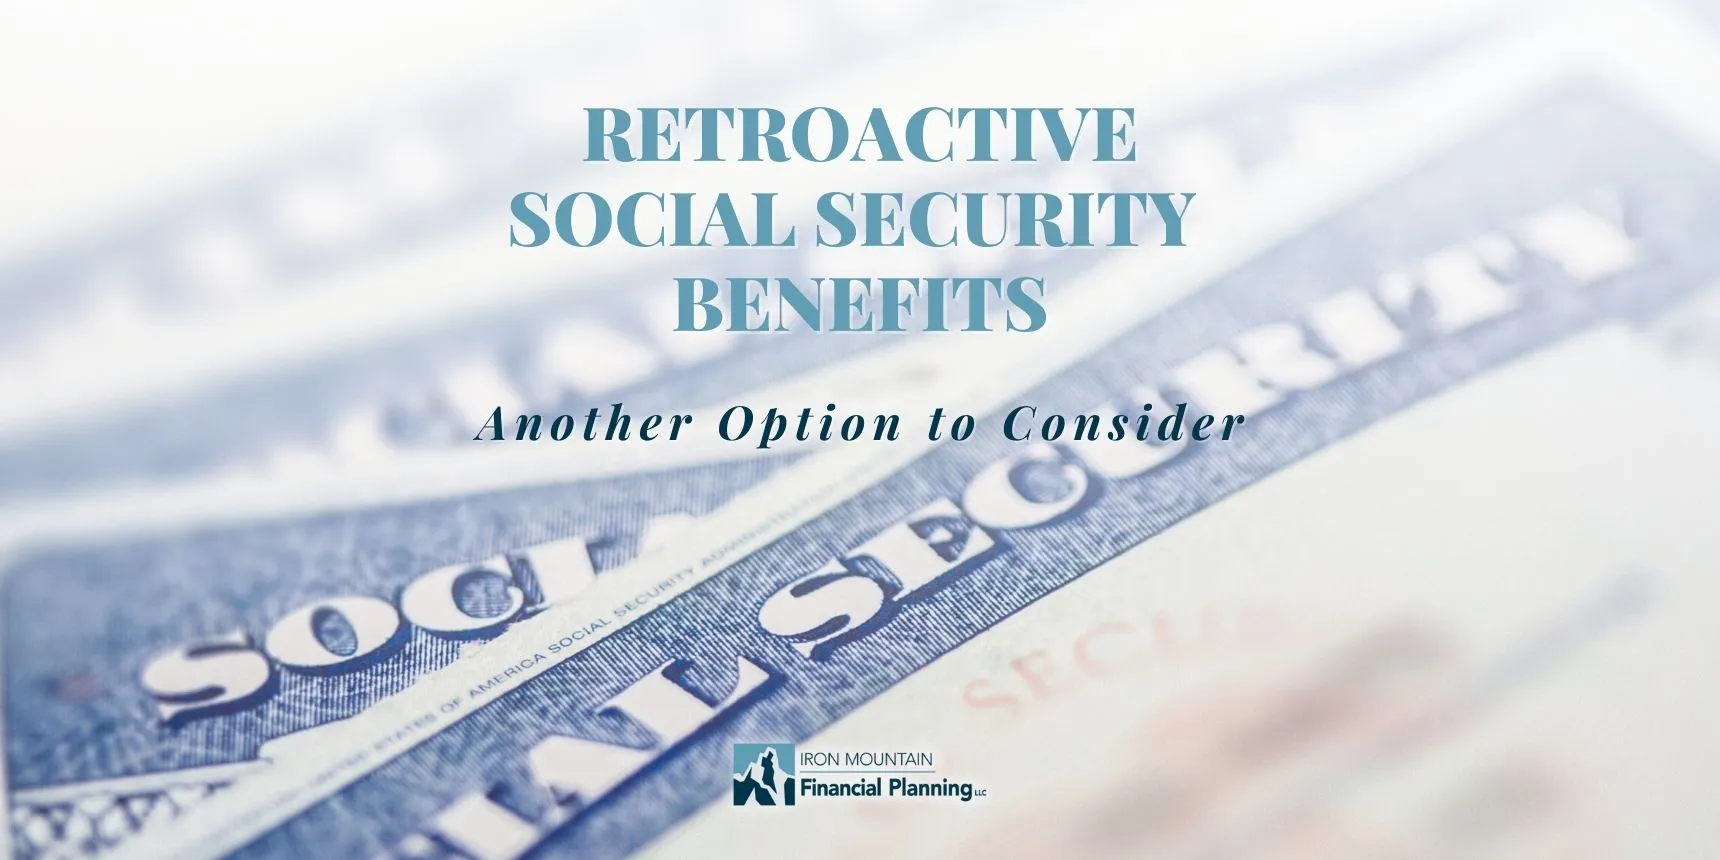 Retro Active Social Security Benefits - Another Option to Consider